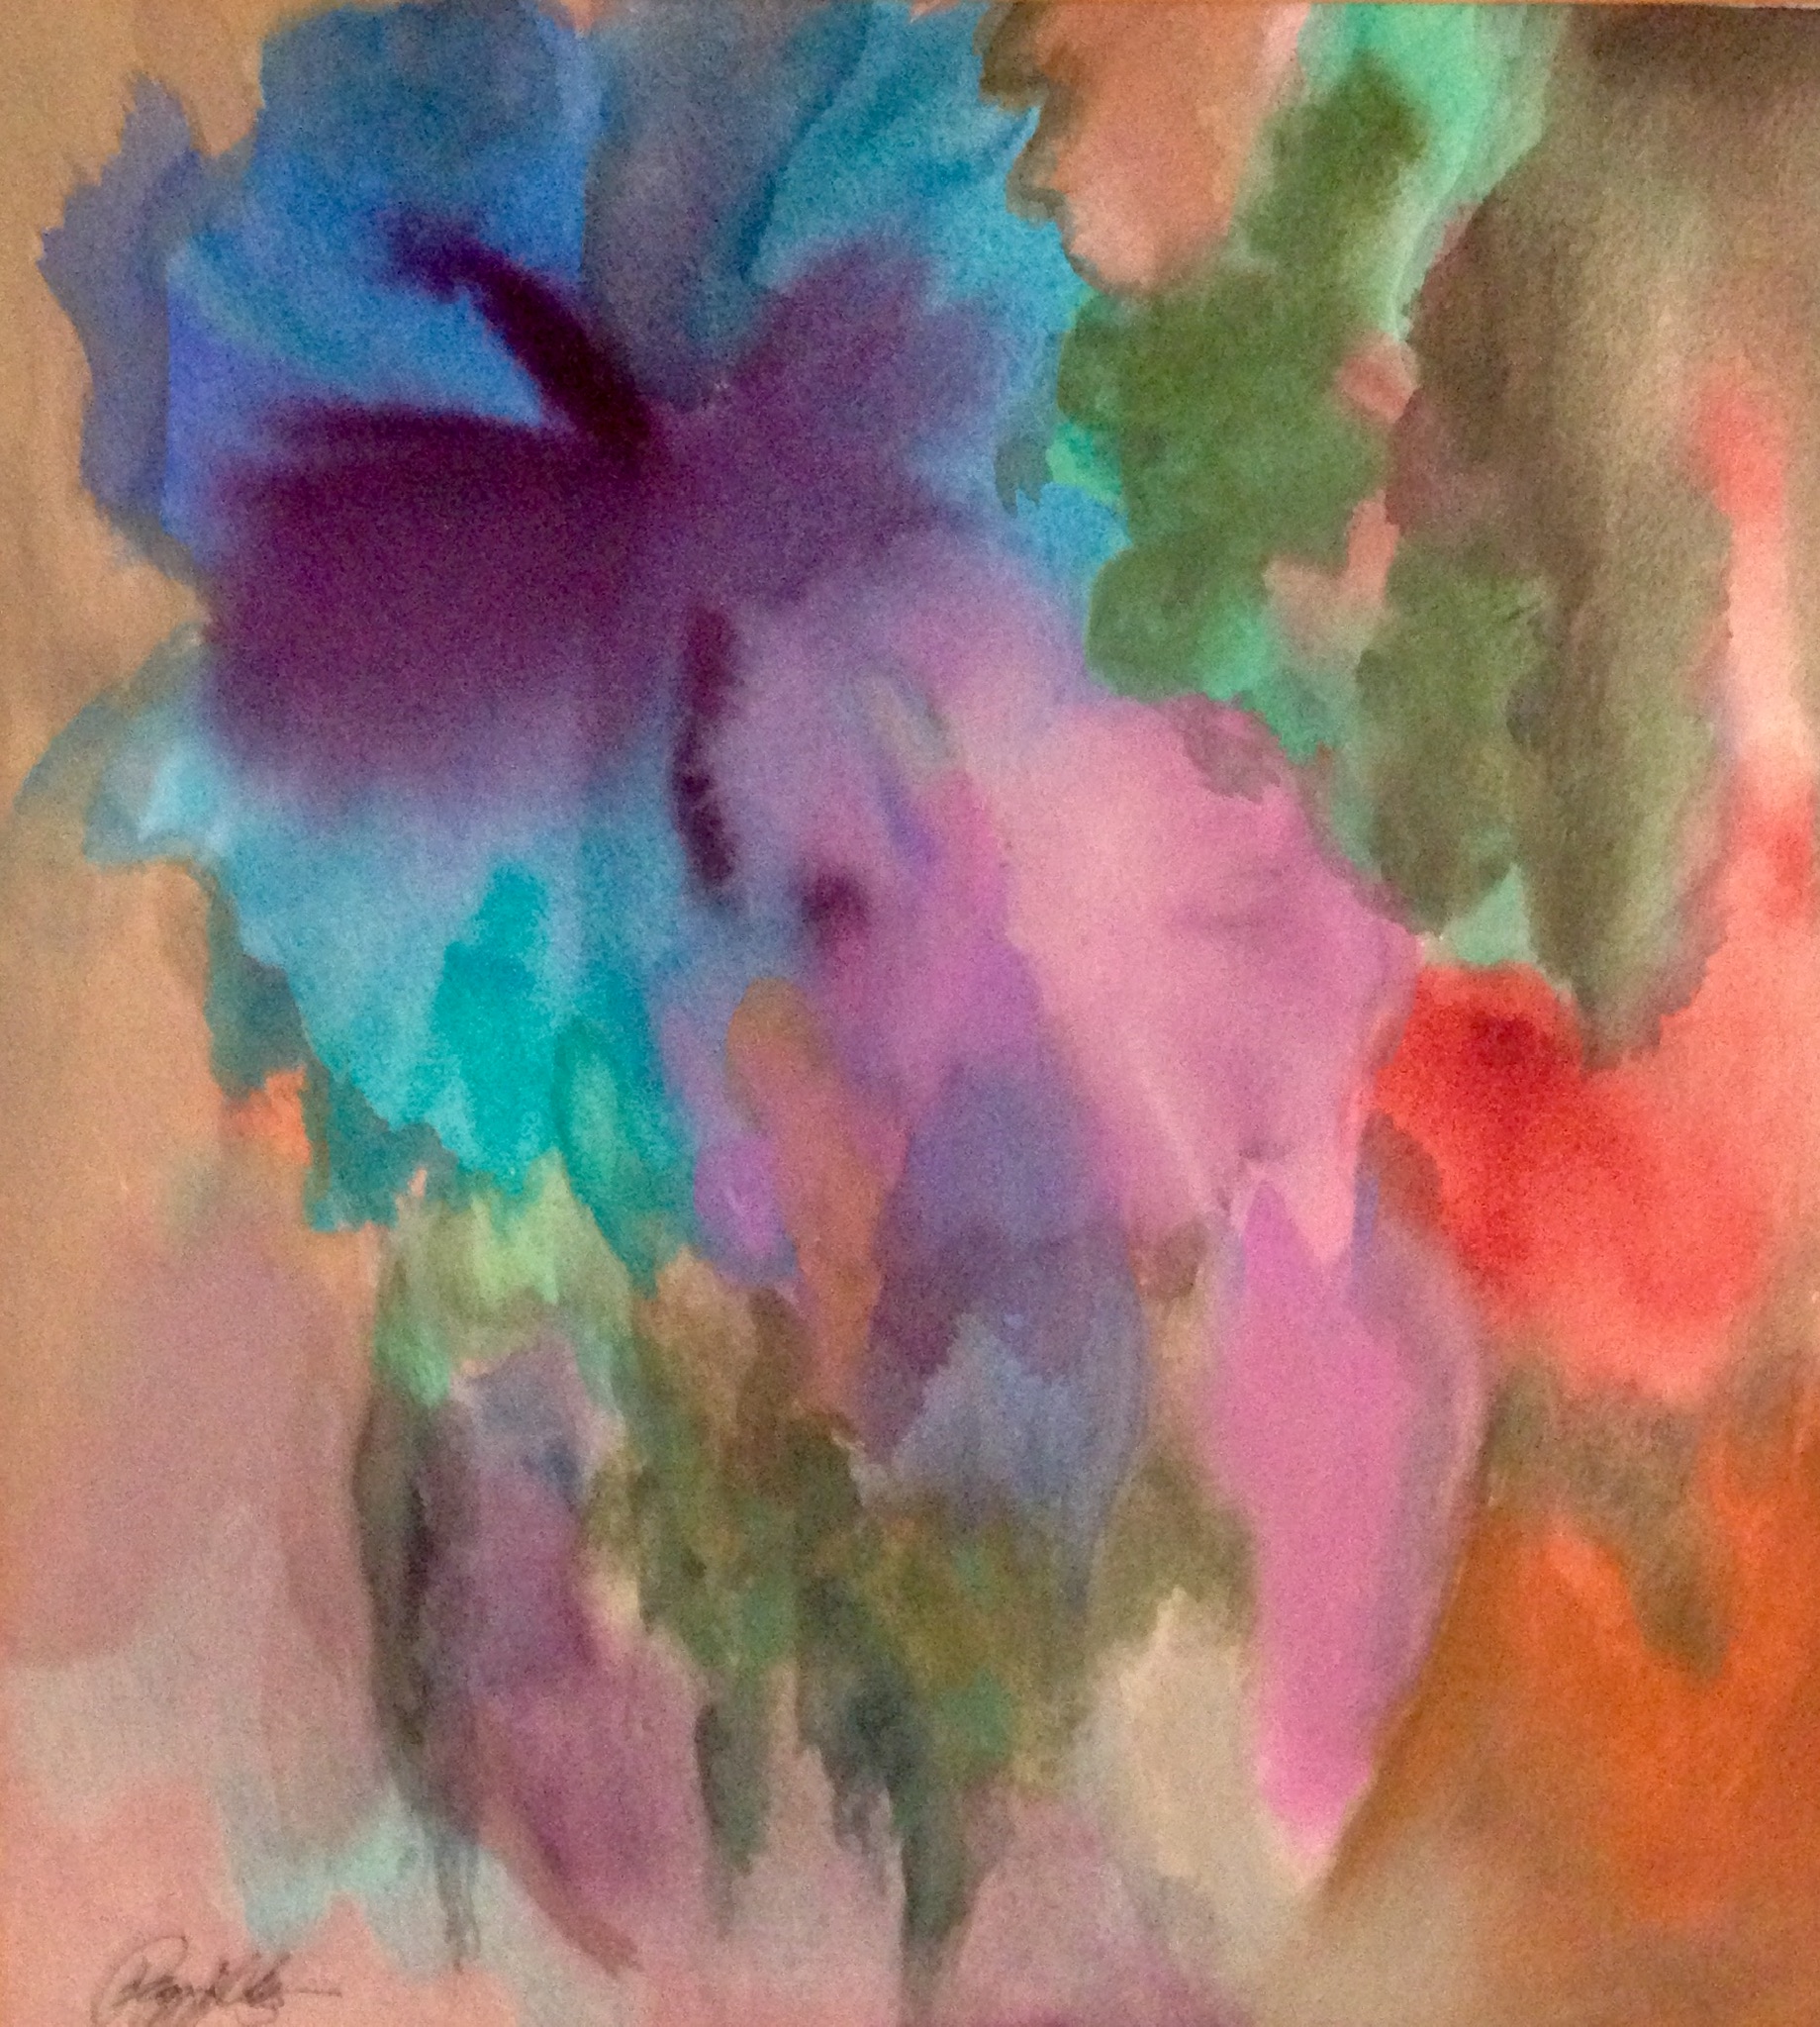 Blue Hibiscus by Peggy Odgers.  Watercolor on paper.